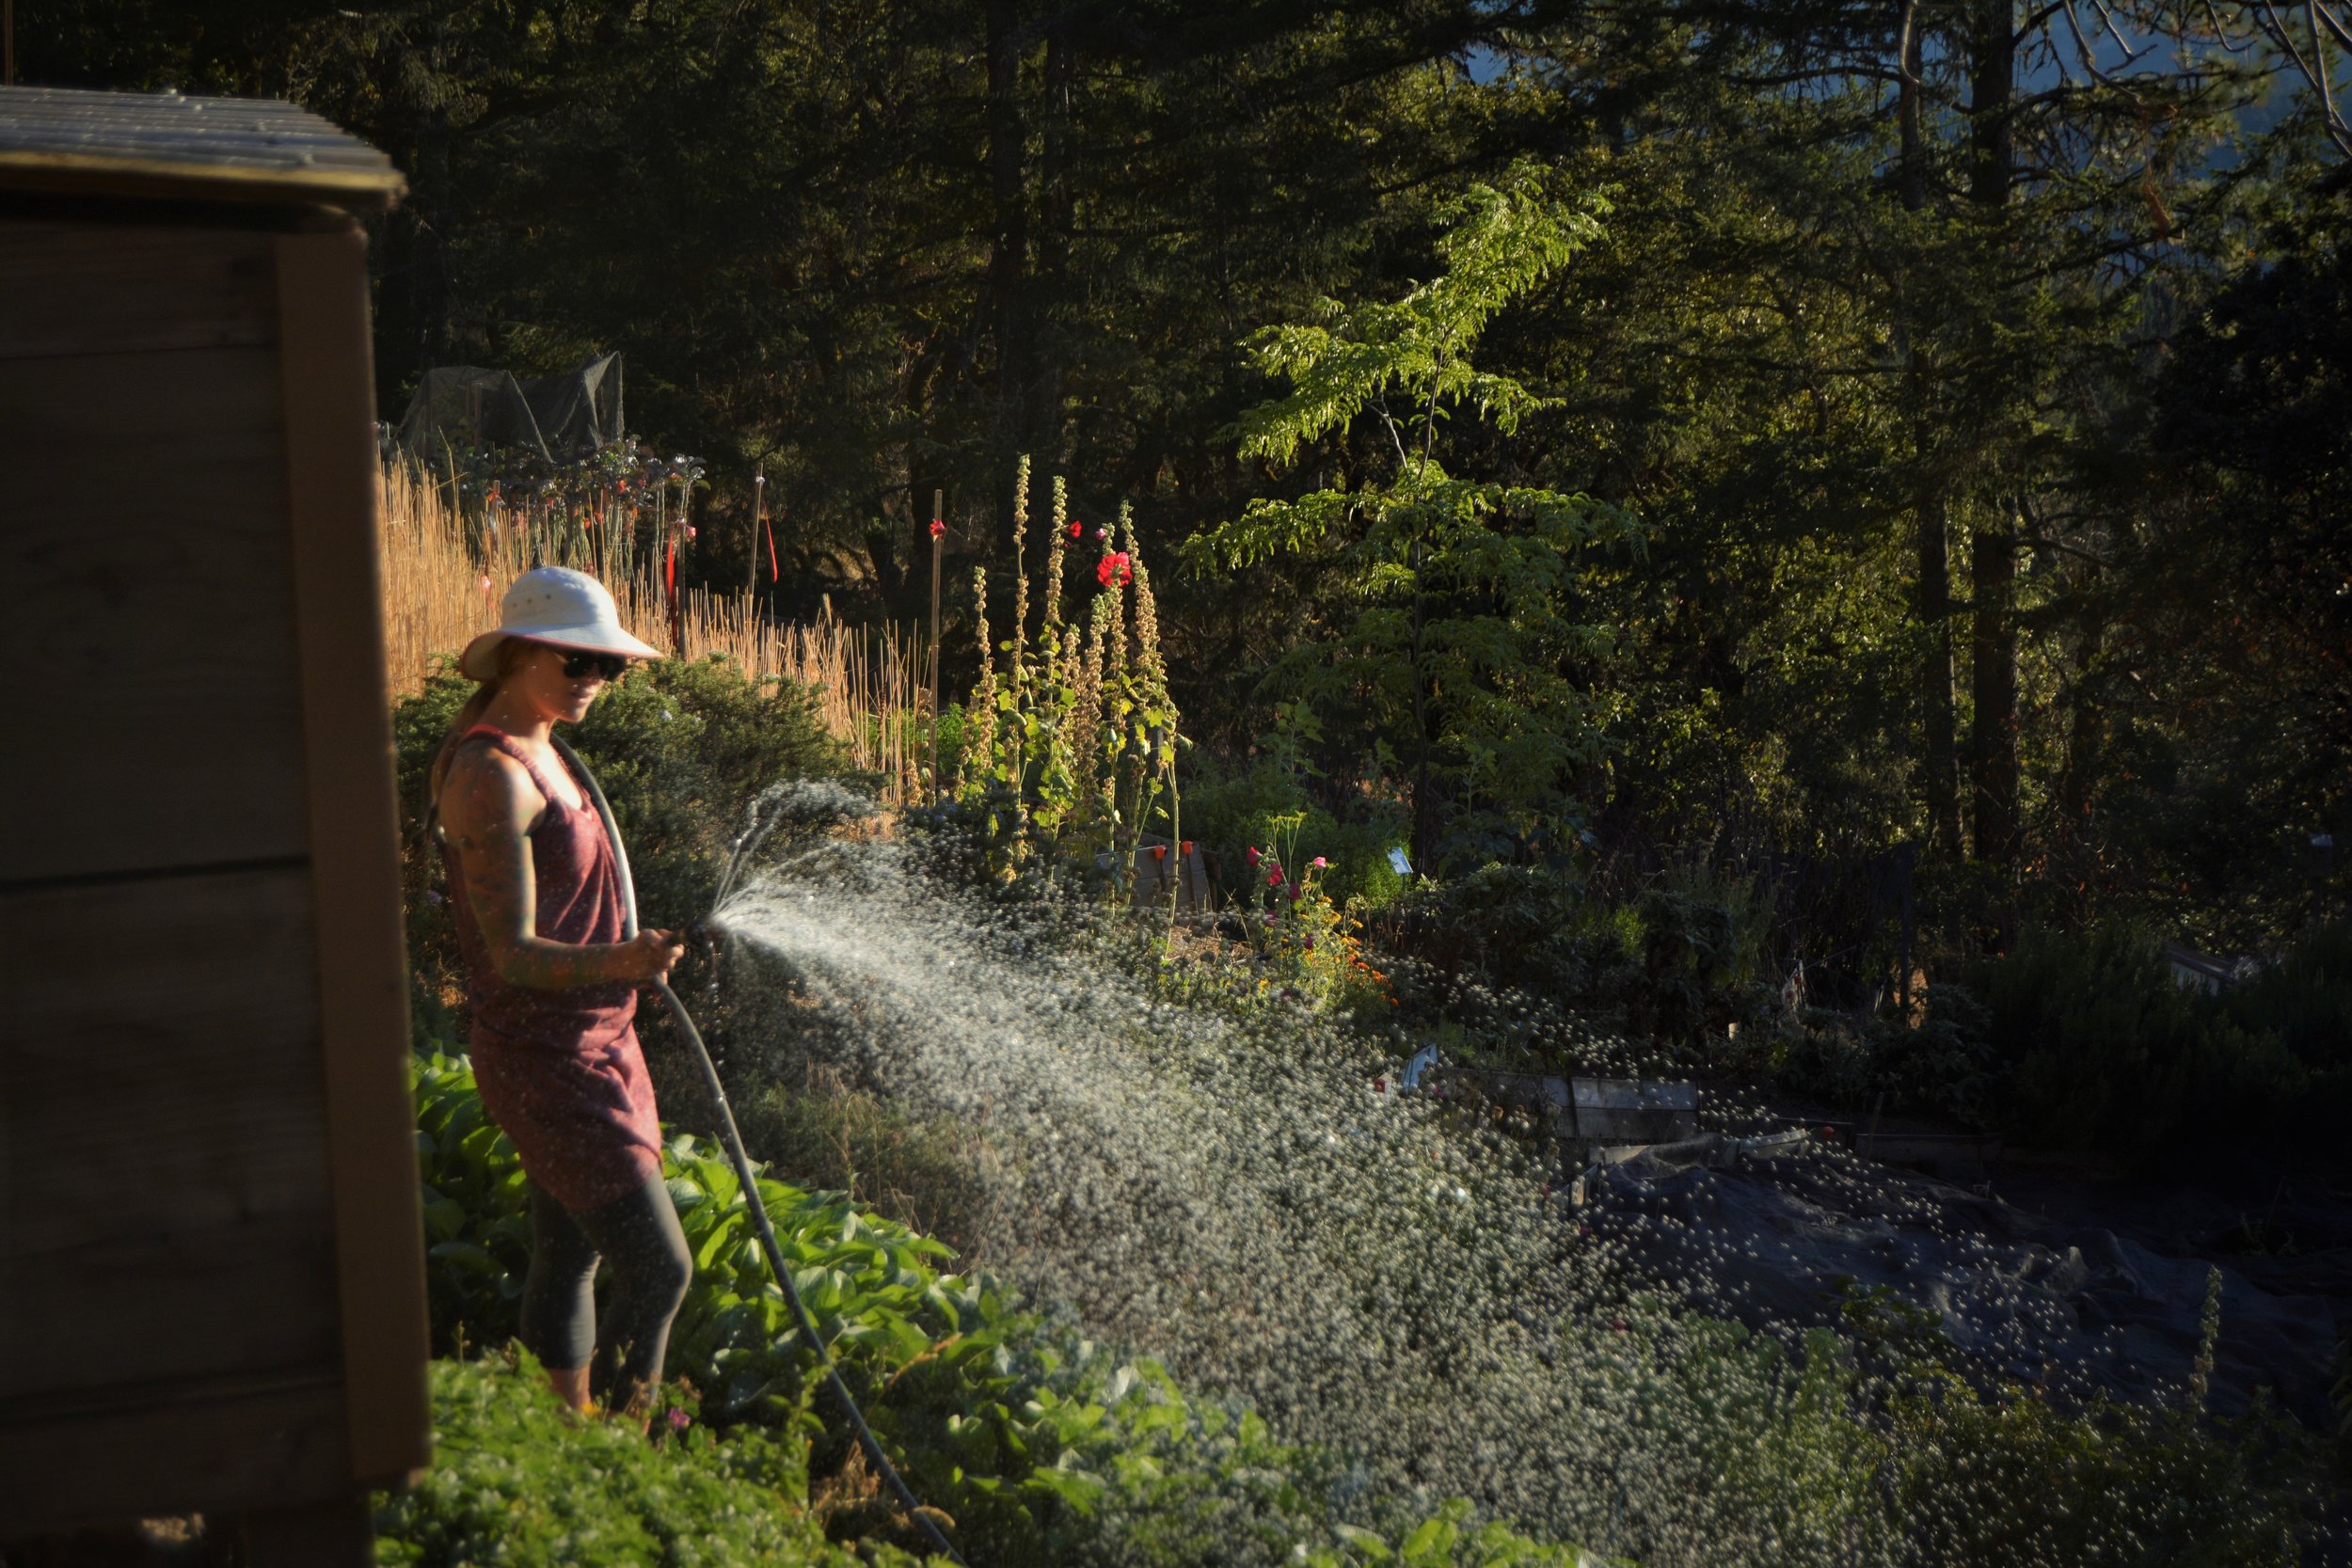 Sharon Coombs watering the beds.